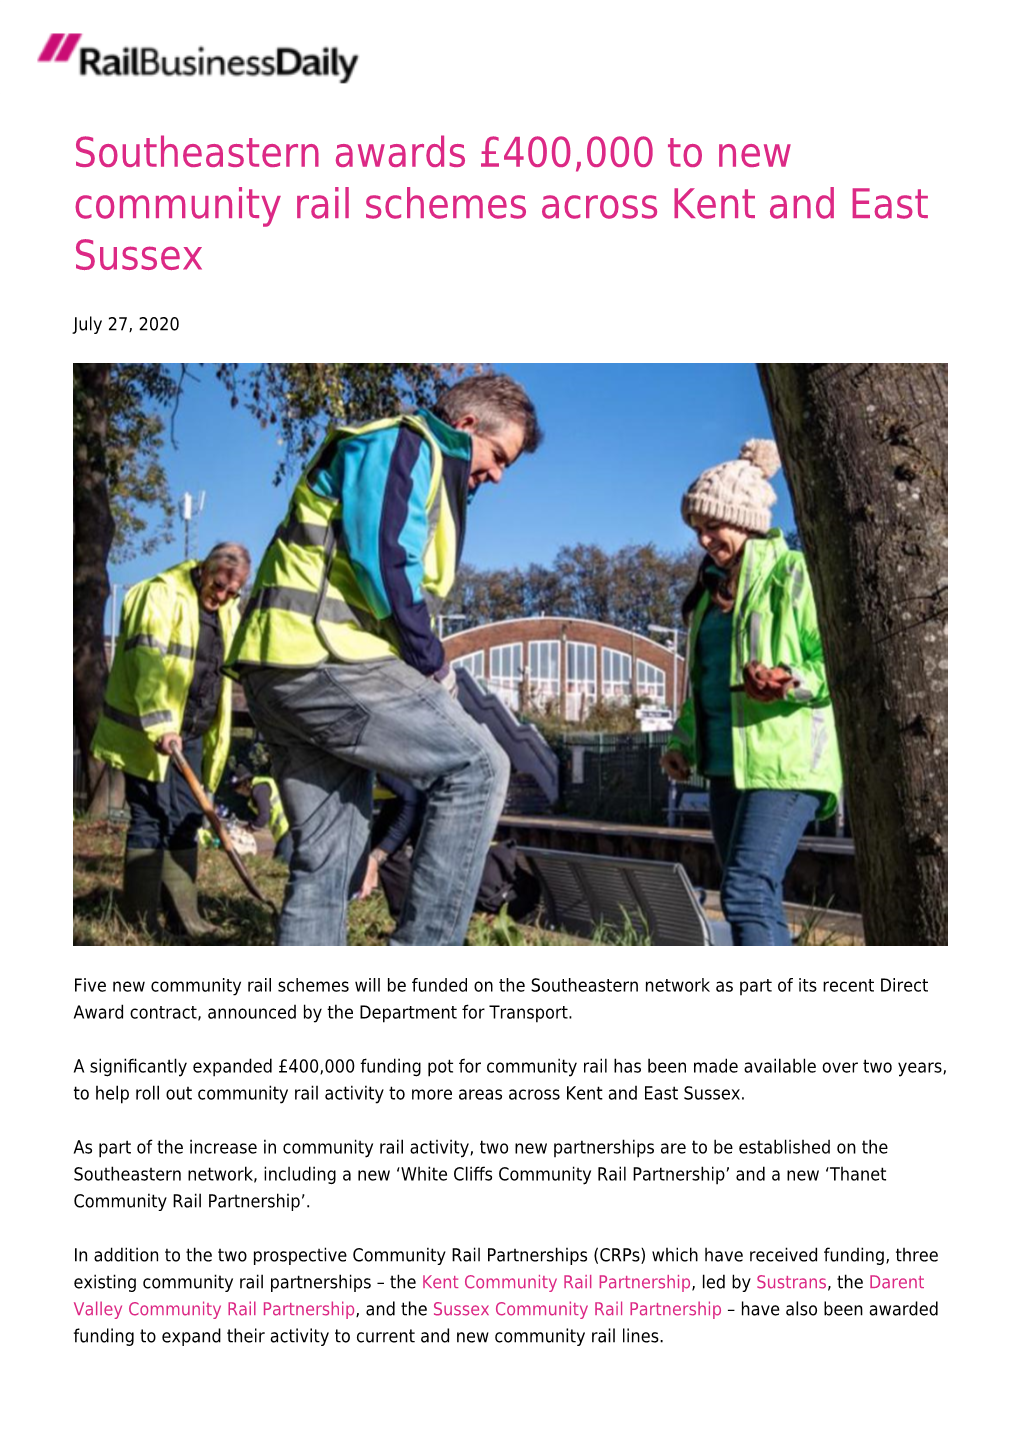 Southeastern Awards £400,000 to New Community Rail Schemes Across Kent and East Sussex